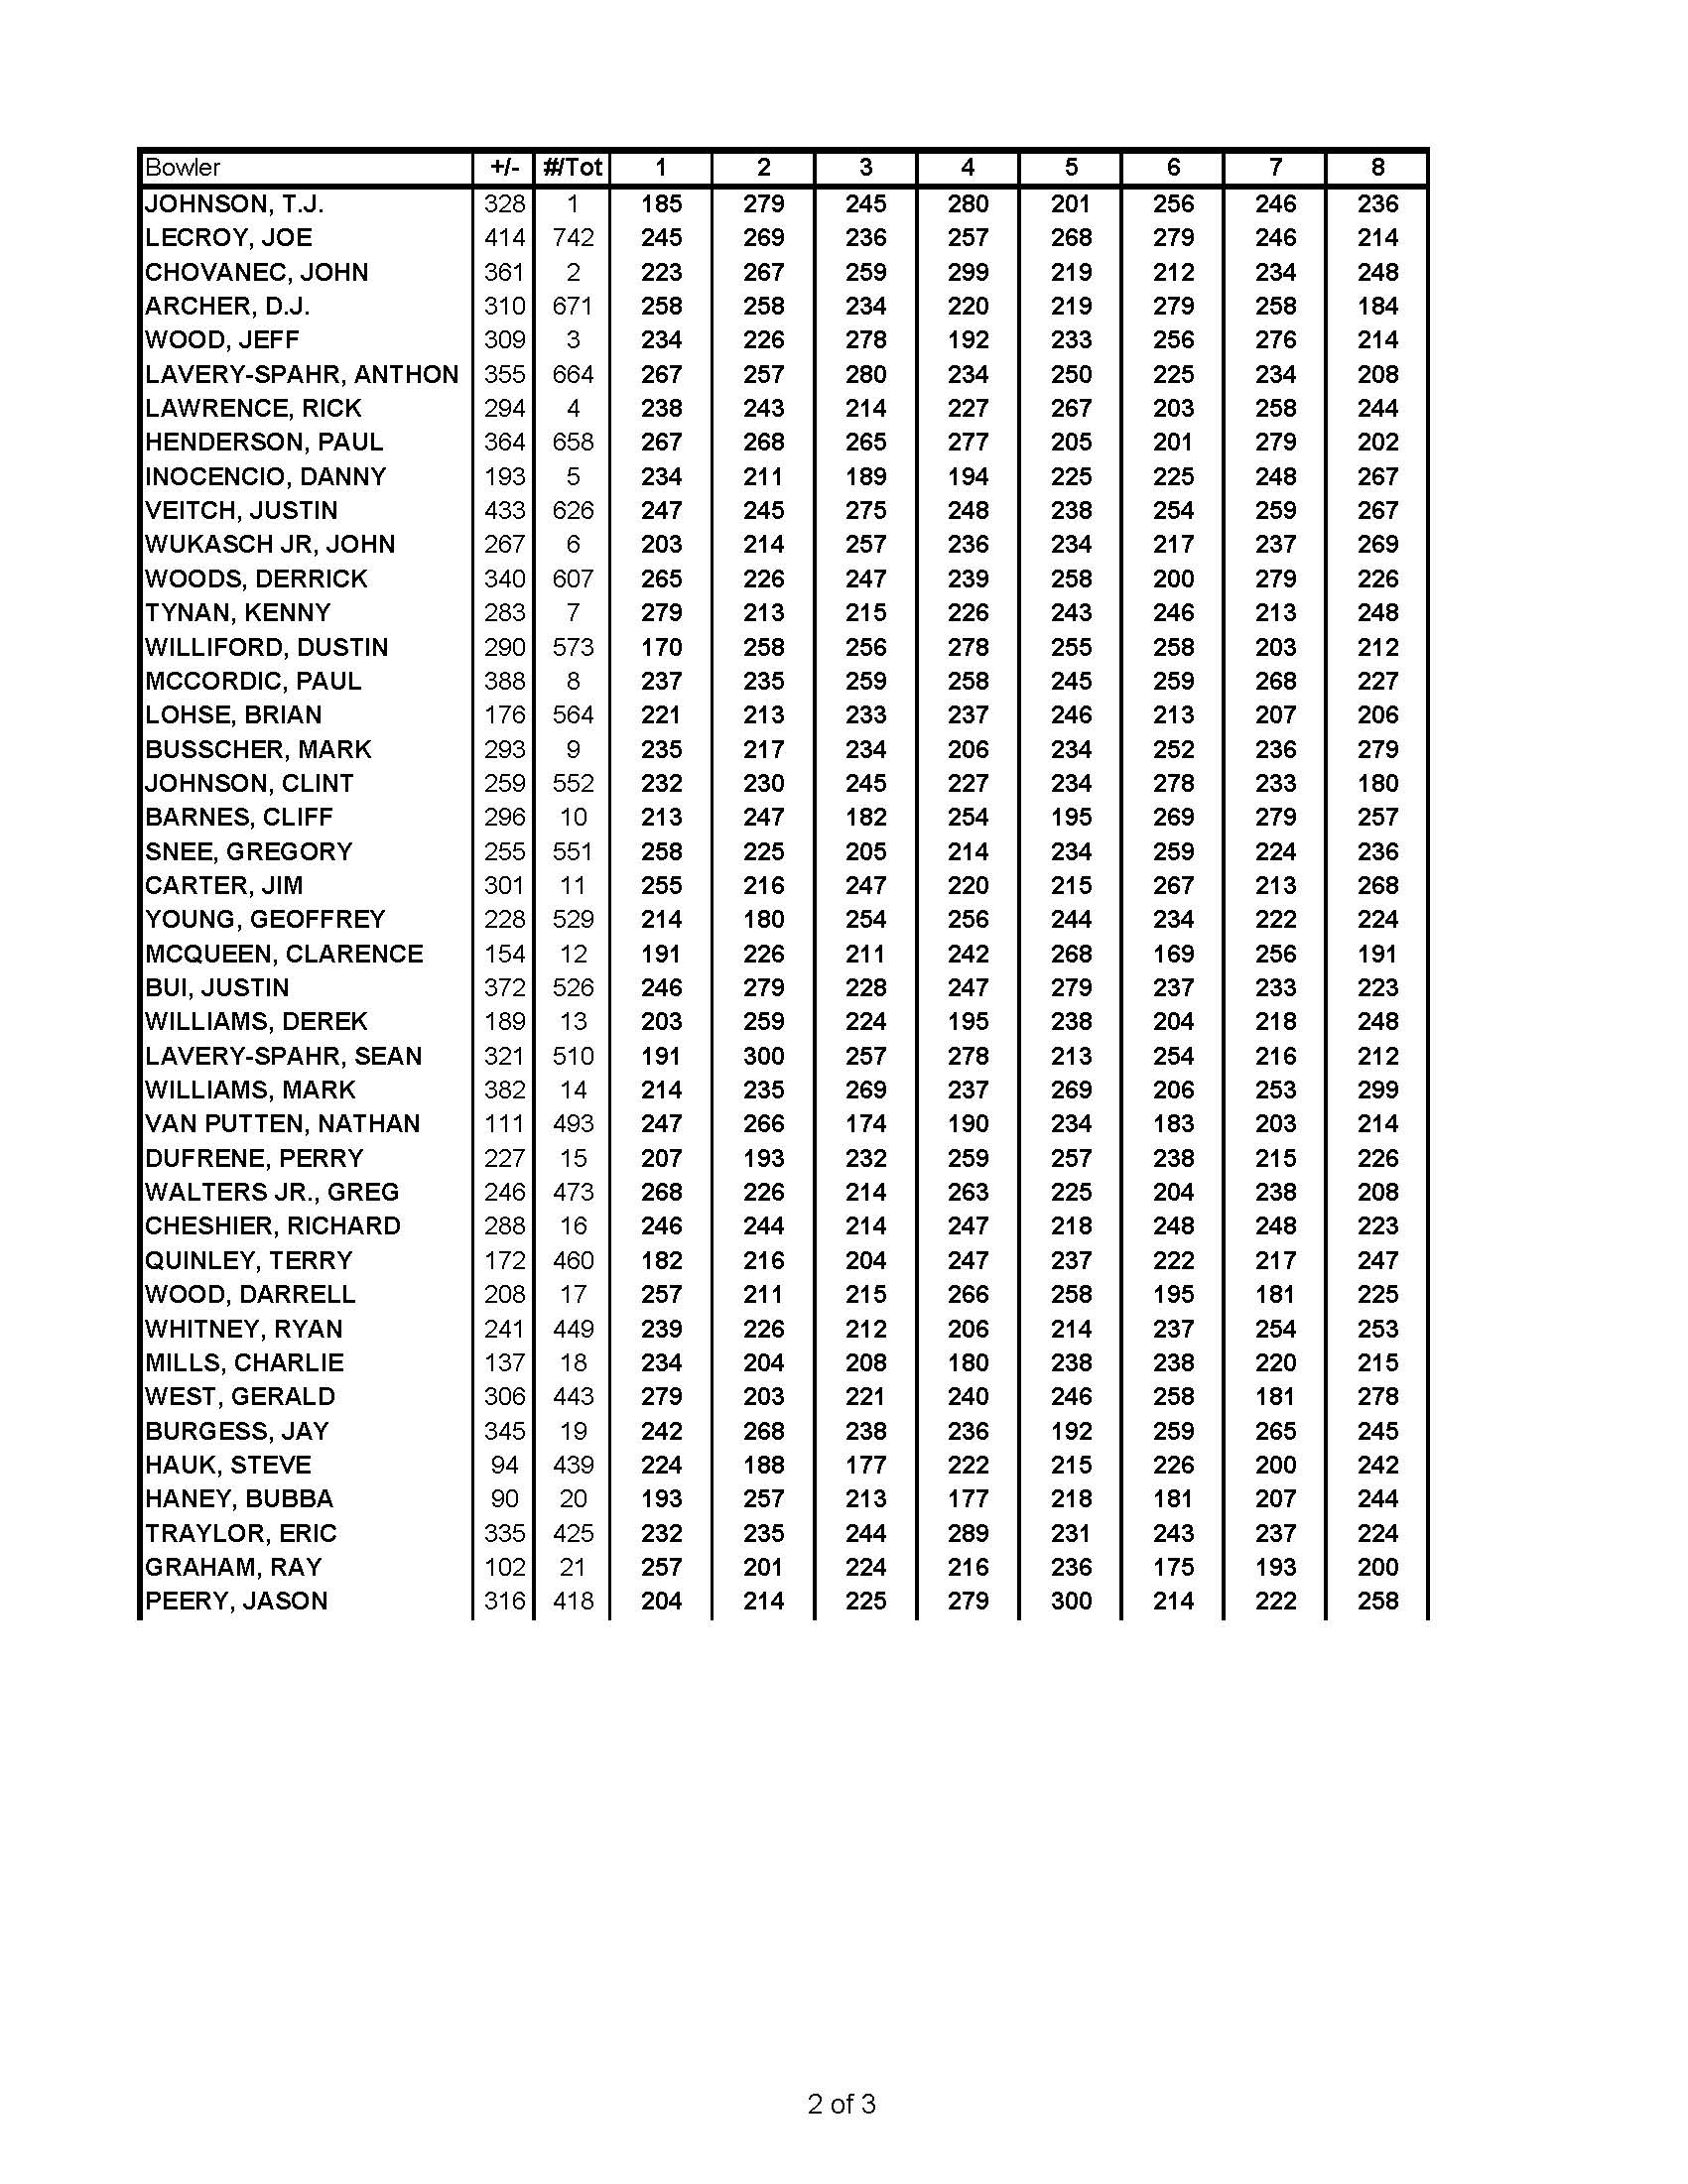 05282017results_Page_2